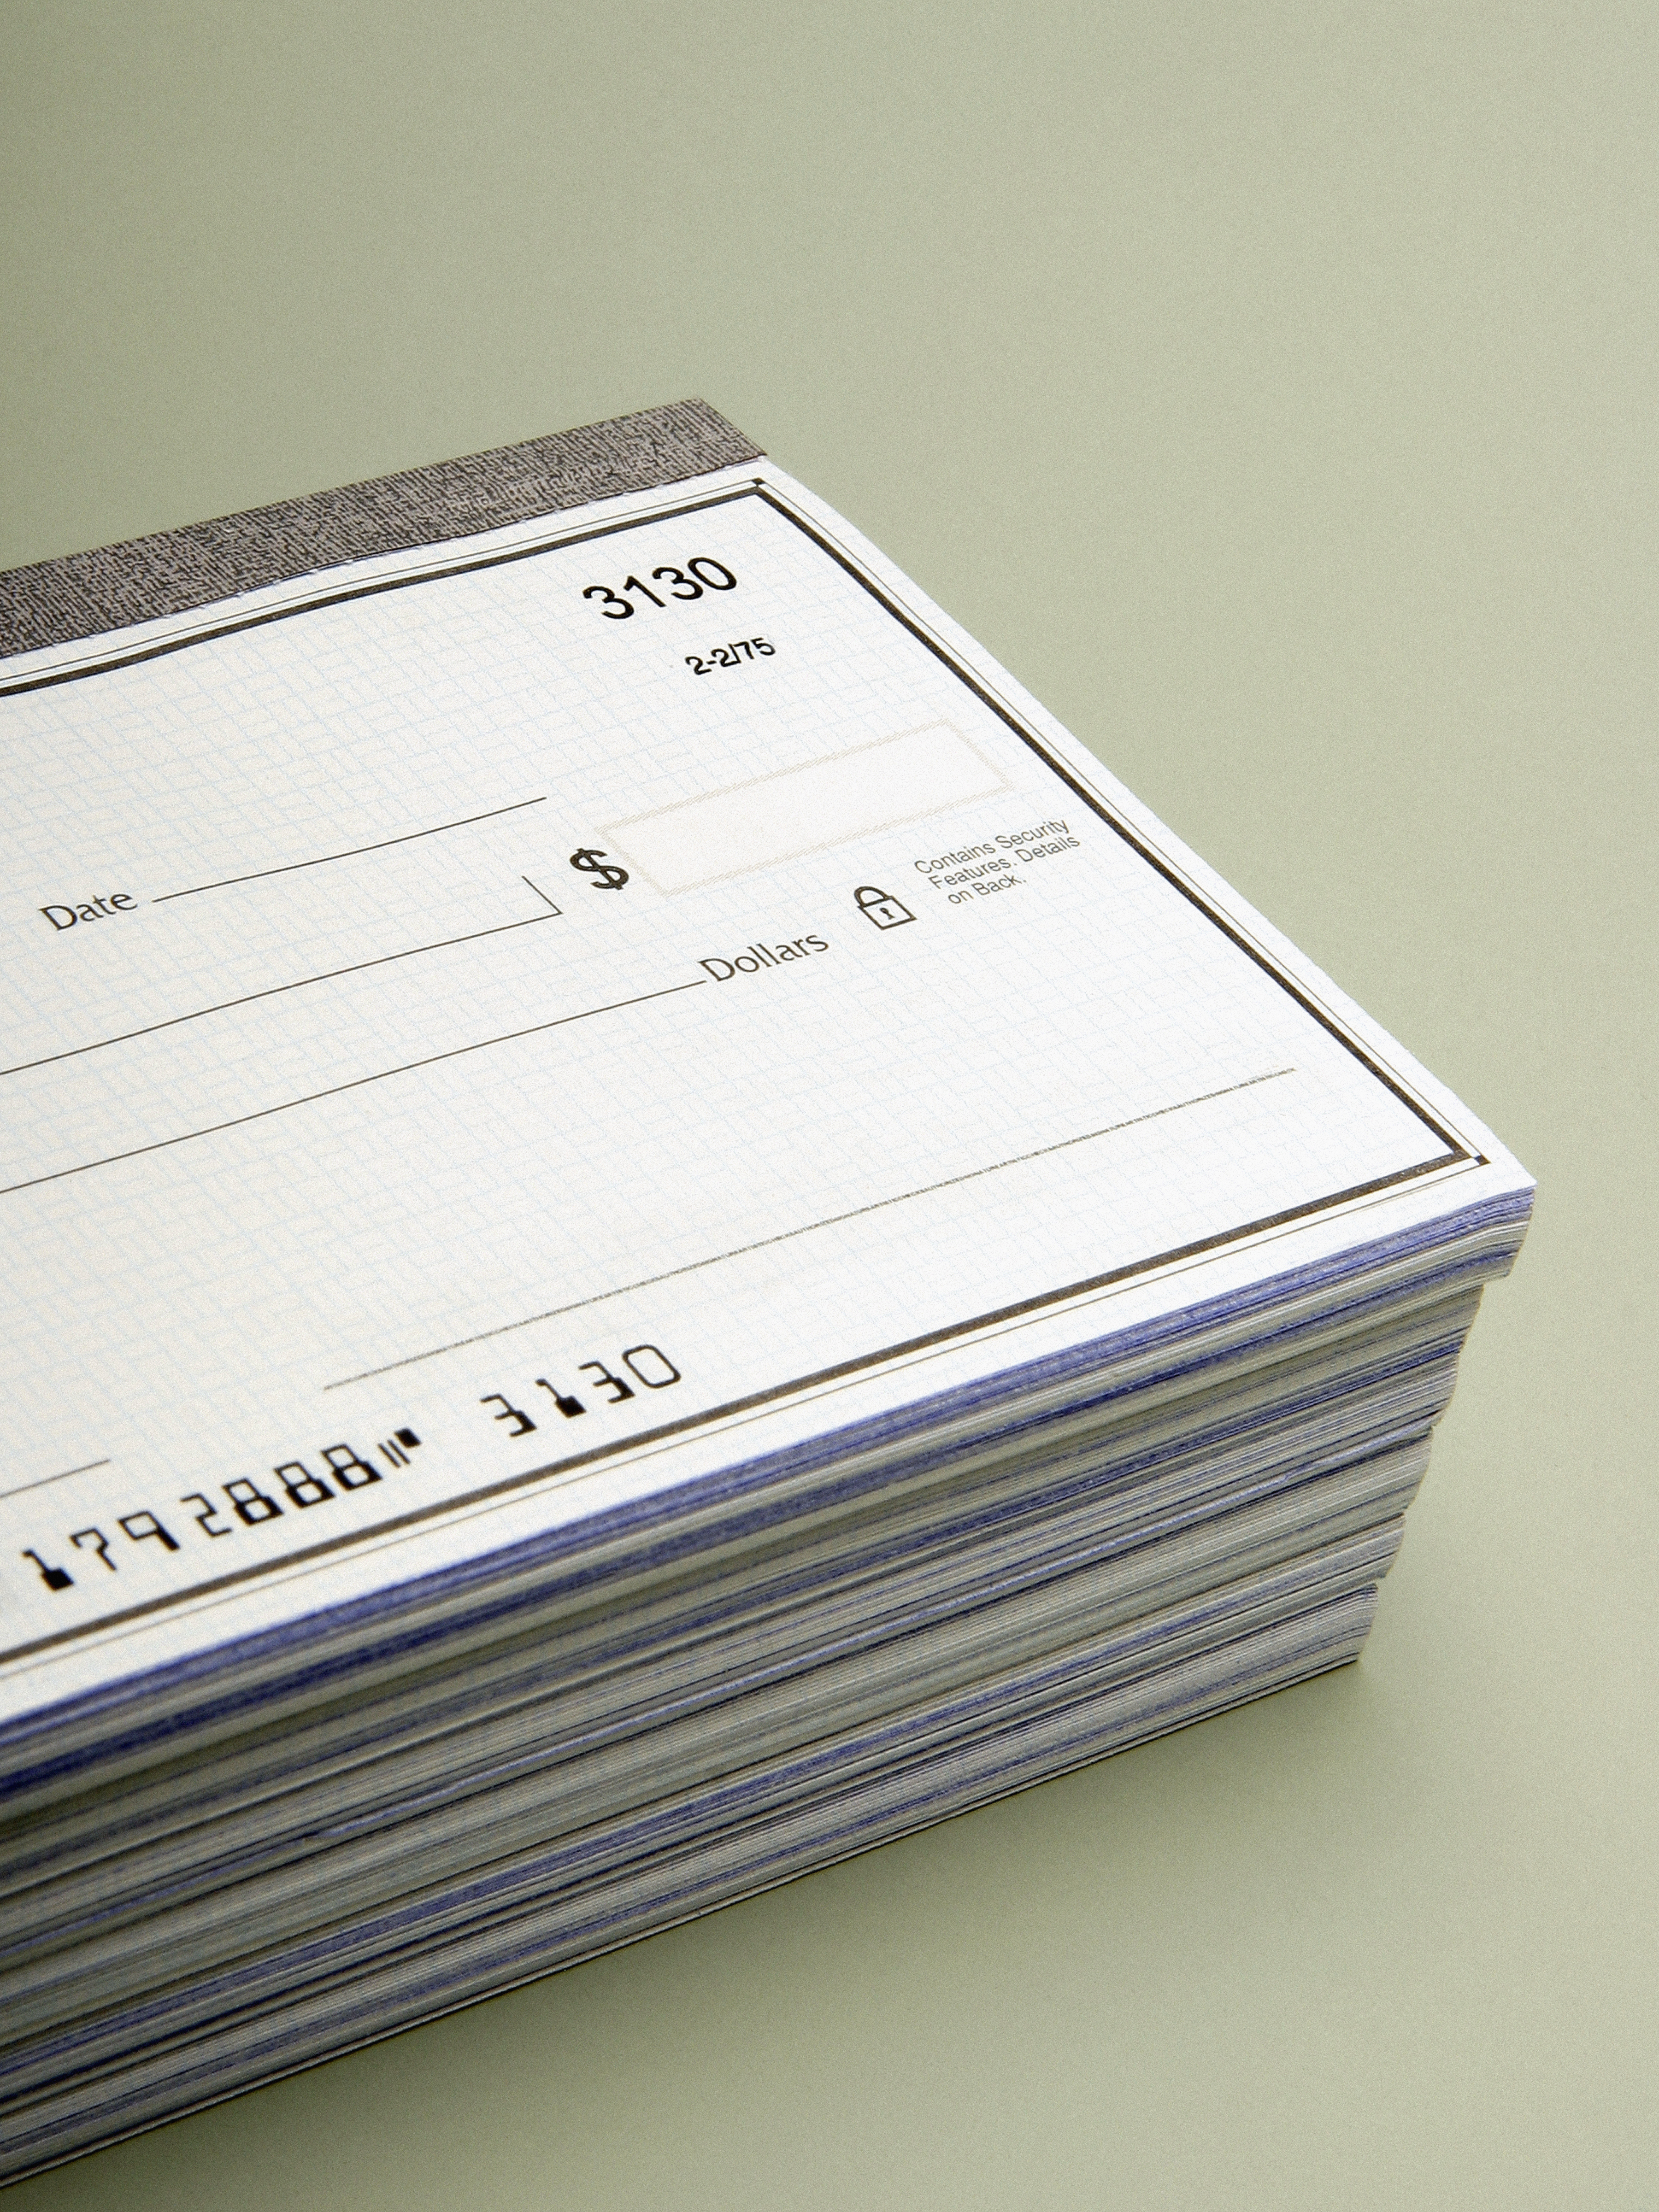 A stack of blank checks | Source: Getty Images